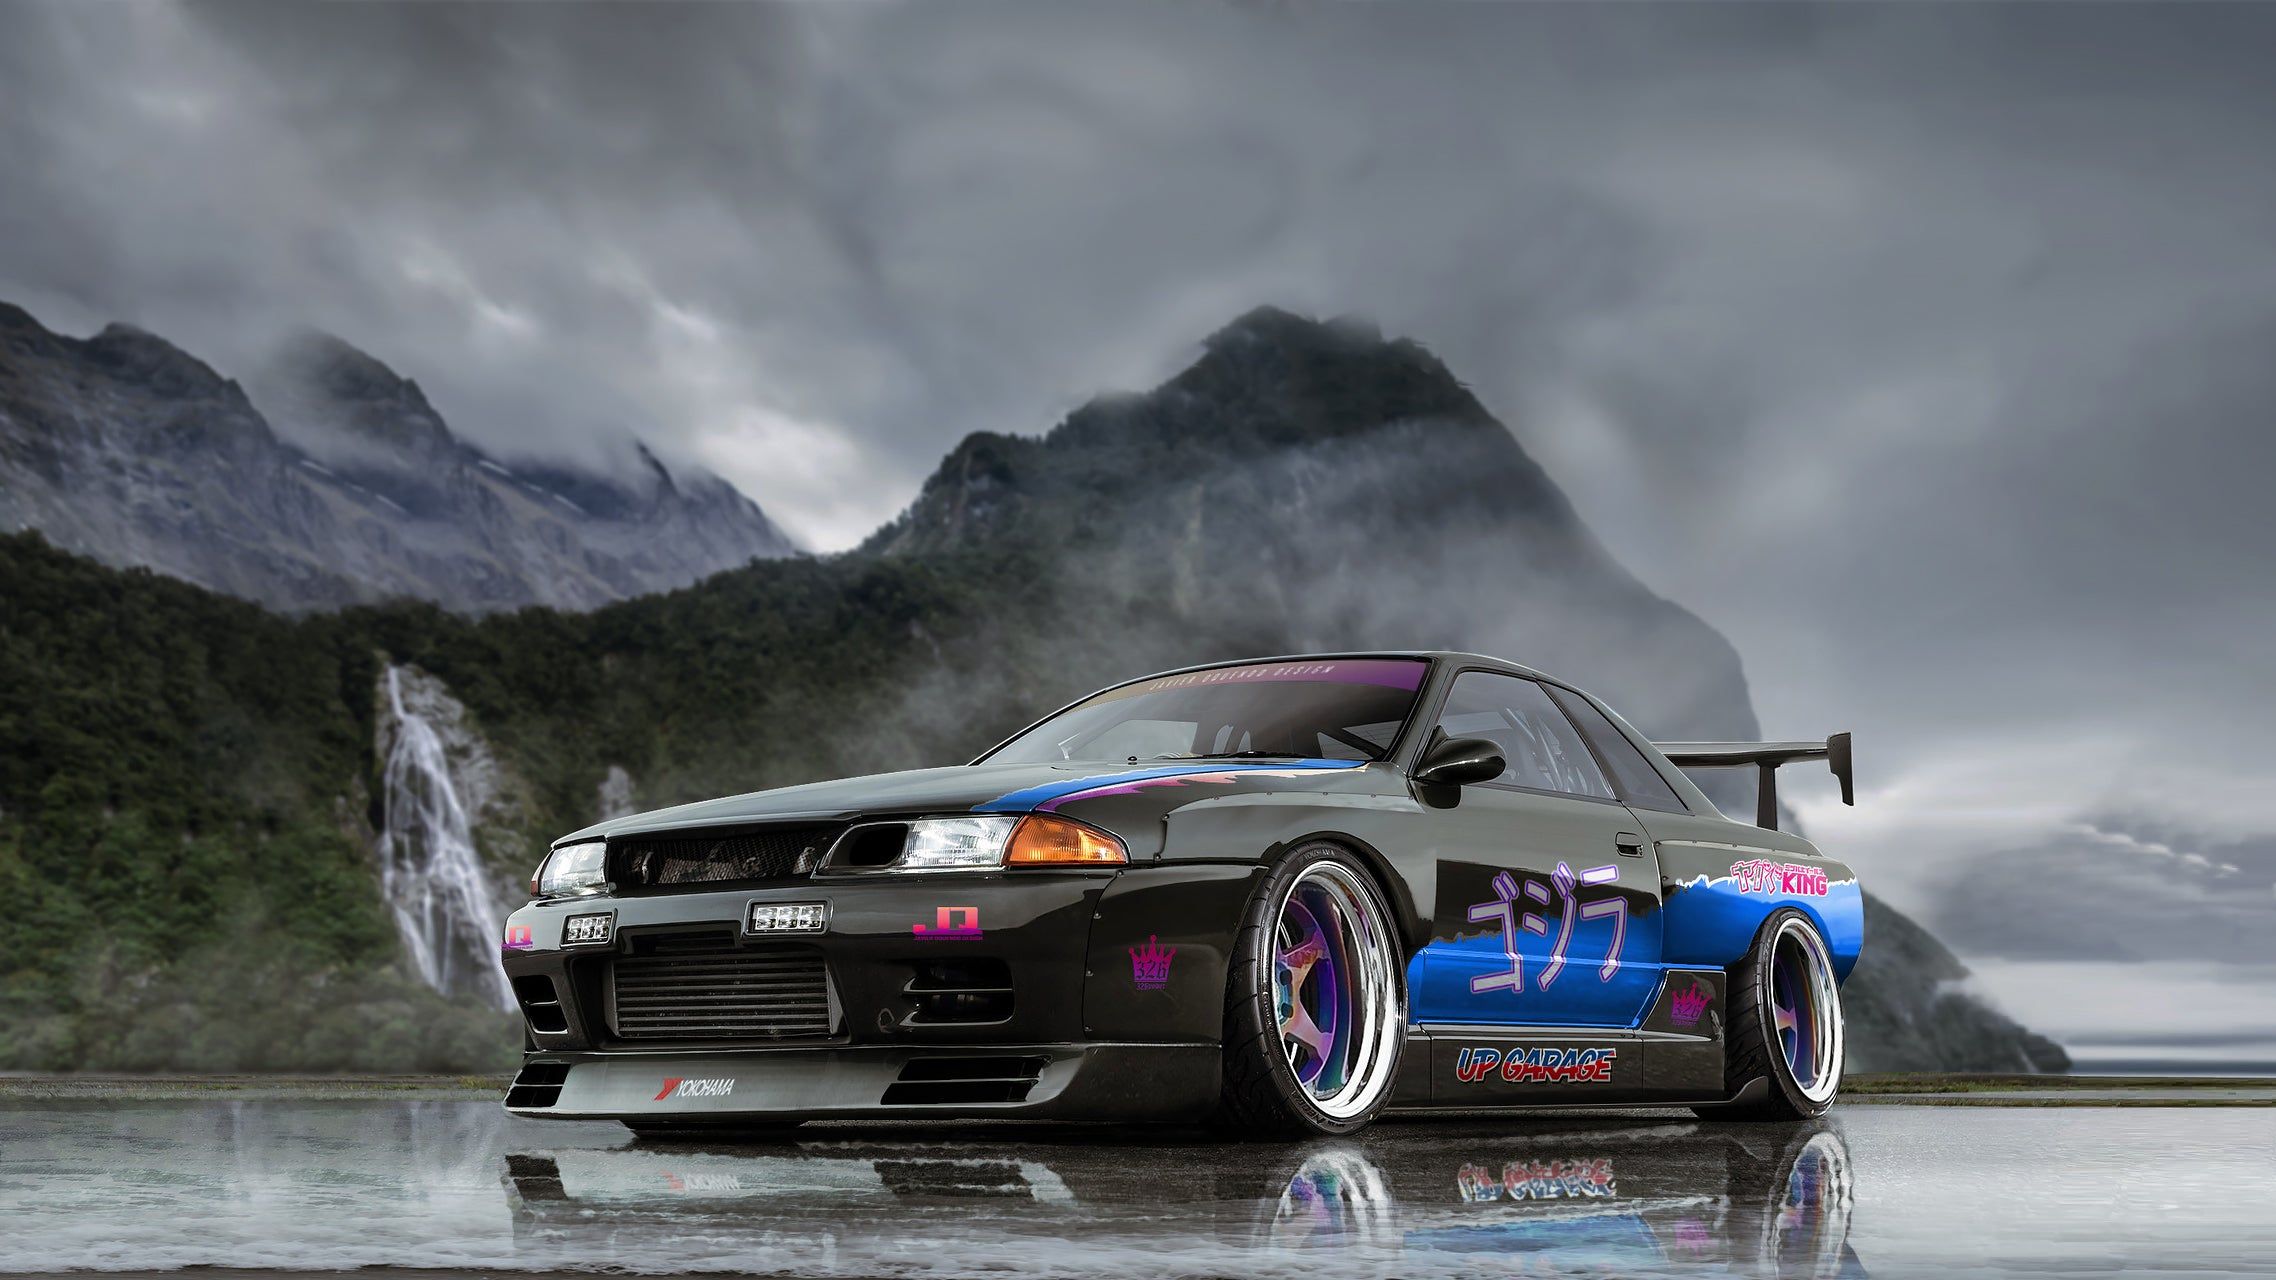 coldest jdm wallpapers